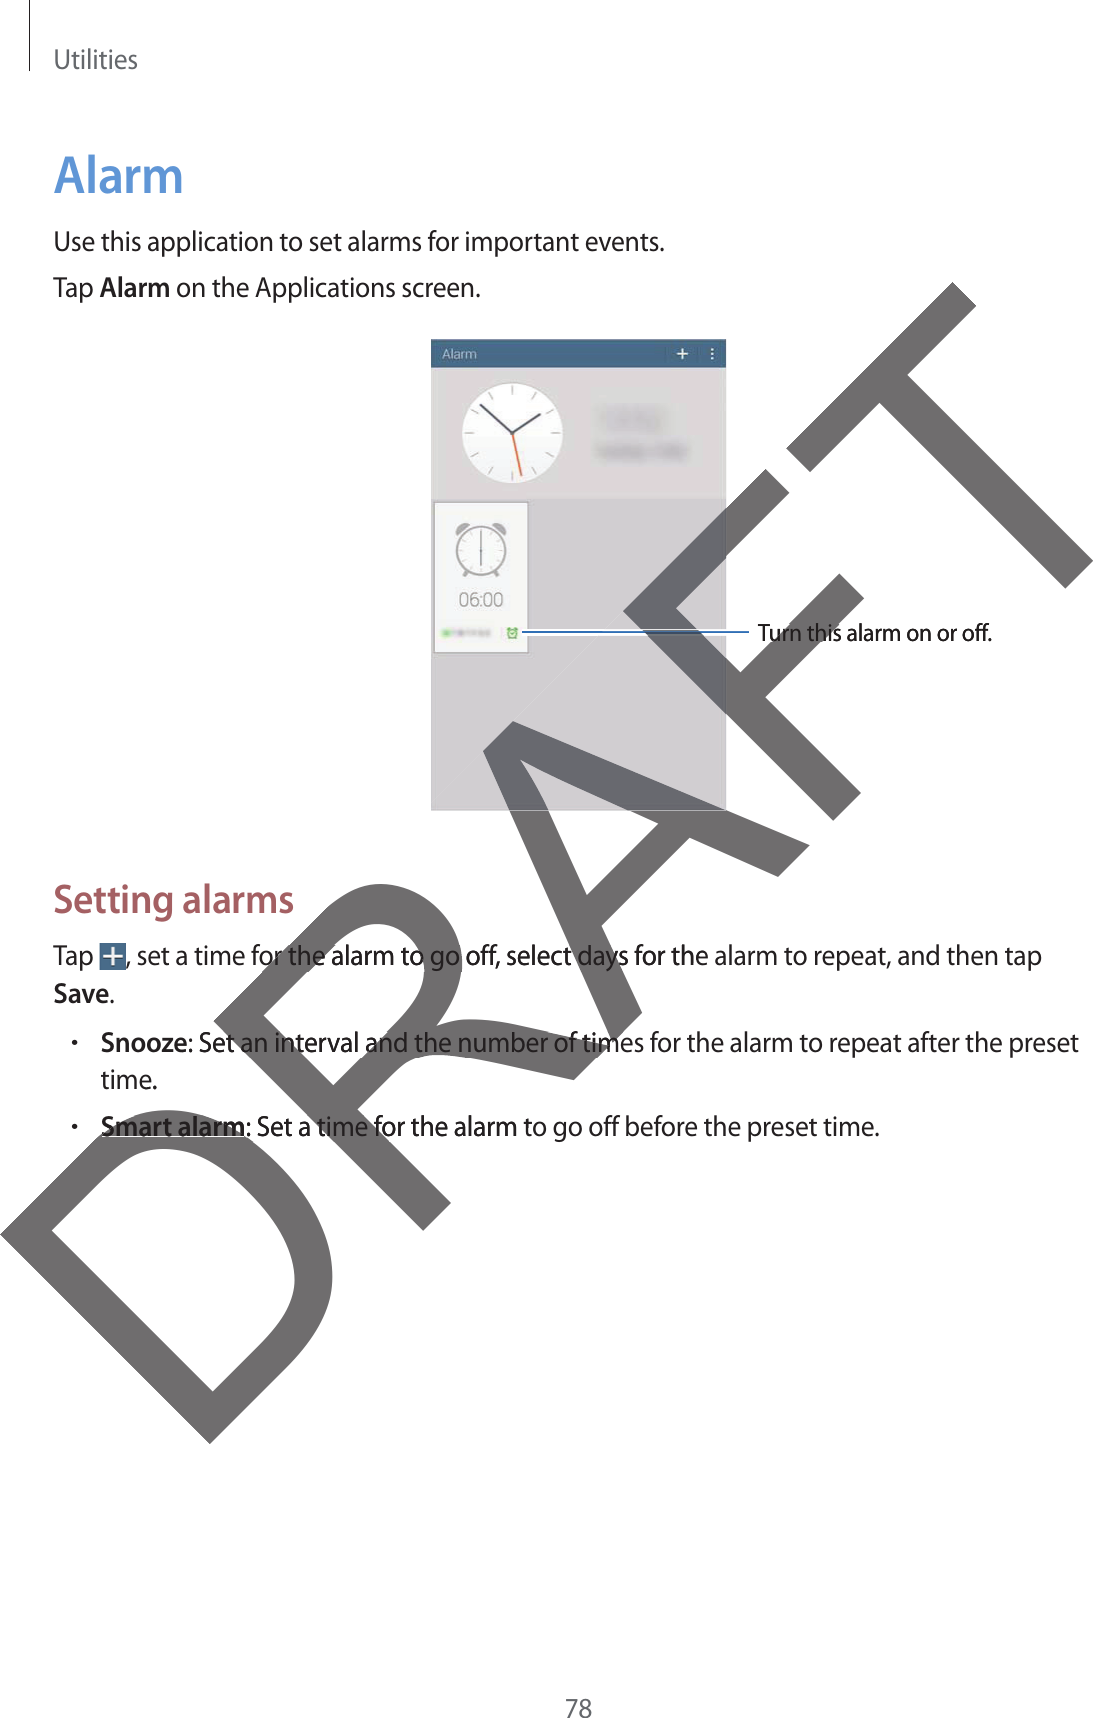 Utilities78AlarmUse this application to set alarms for important events.Tap Alarm on the Applications screen.Turn this alarm on or off.Setting alarmsTap  , set a time for the alarm to go off, select days for the alarm to repeat, and then tap Save.rSnooze: Set an interval and the number of times for the alarm to repeat after the presettime.rSmart alarm: Set a time for the alarm to go off before the preset time.DReRAFTAFFTurn this alarm on or off.urn thisor the alarm to go off, select days for the or the alarm to go off, select days: Set an interval and the number of timeet an interval and the number of timee.Smart alarmSmart alarm: Set a time for the alarm to: Set a time fo